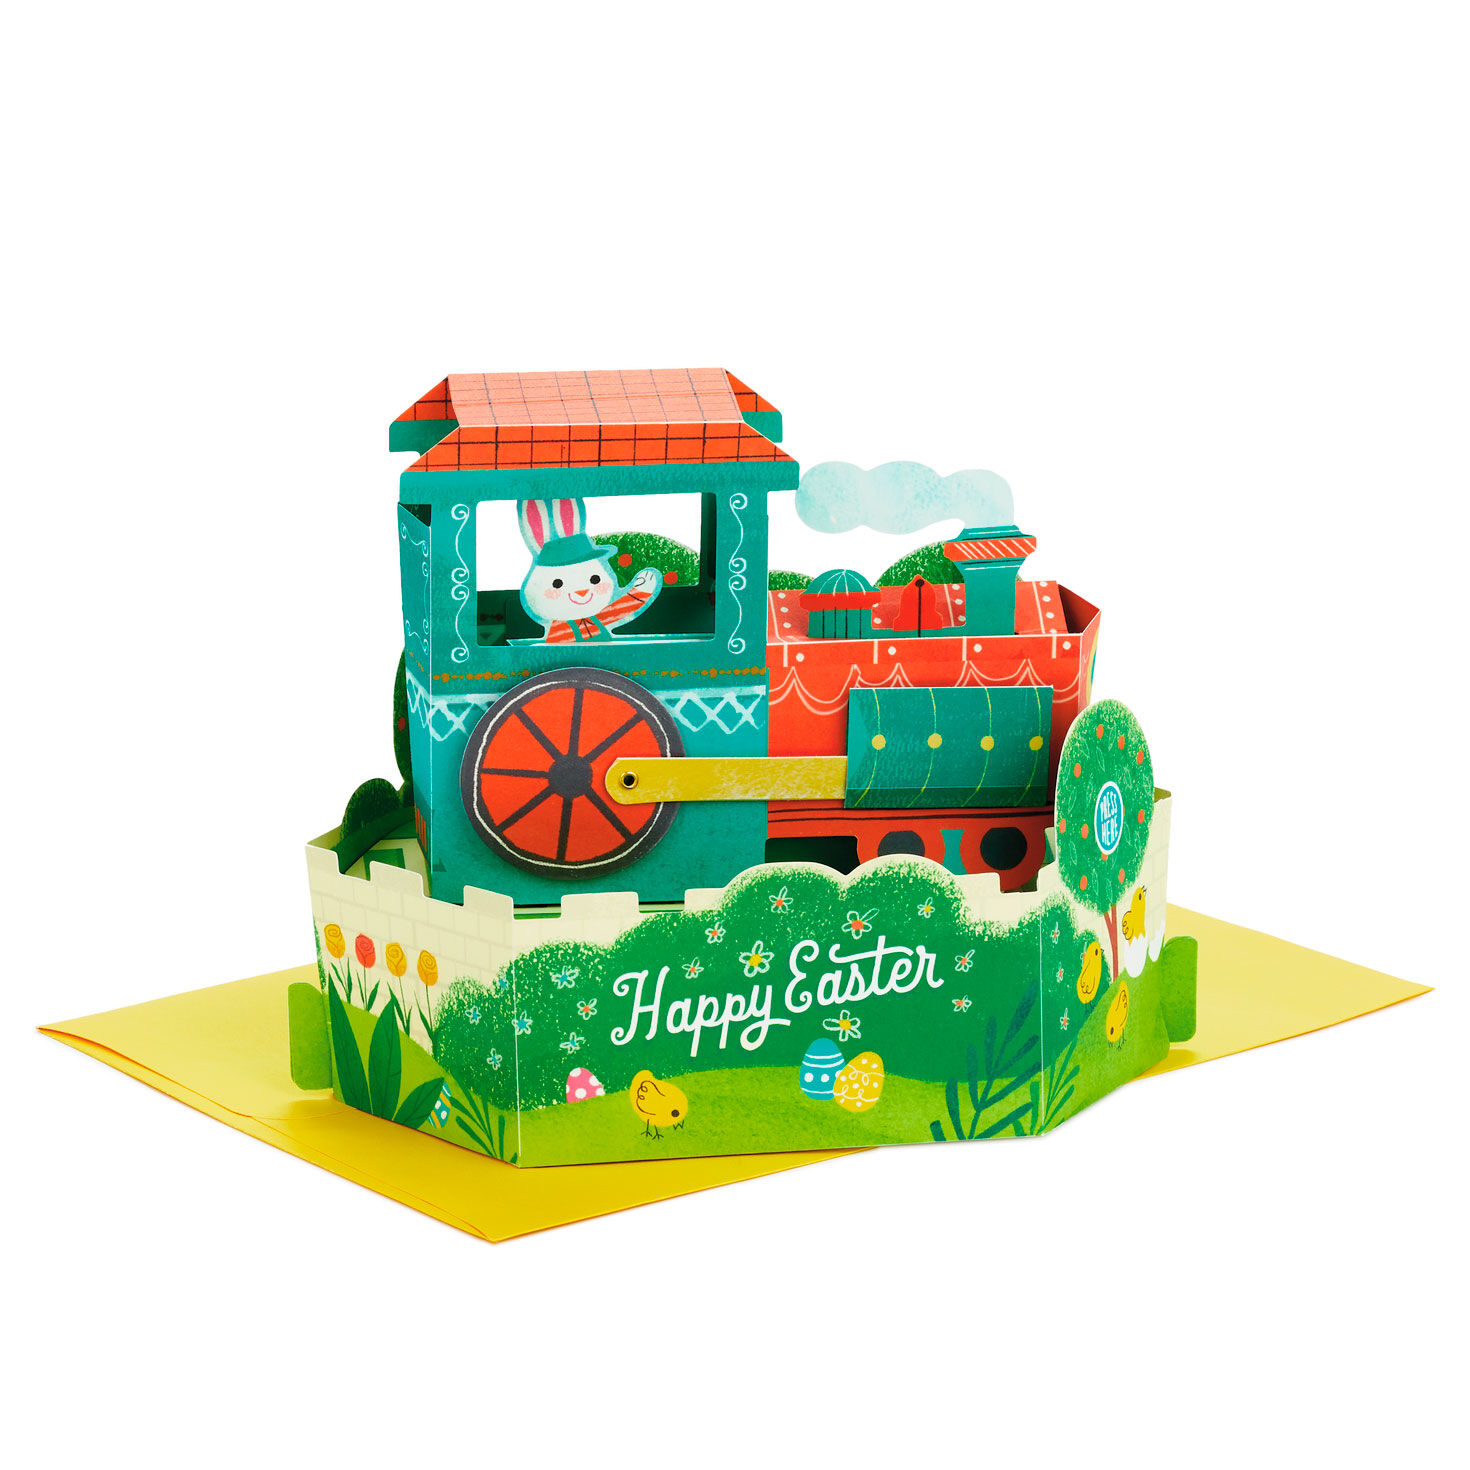 Bunny in Train Musical 3D Pop-Up Easter Card With Motion for only USD 11.99 | Hallmark